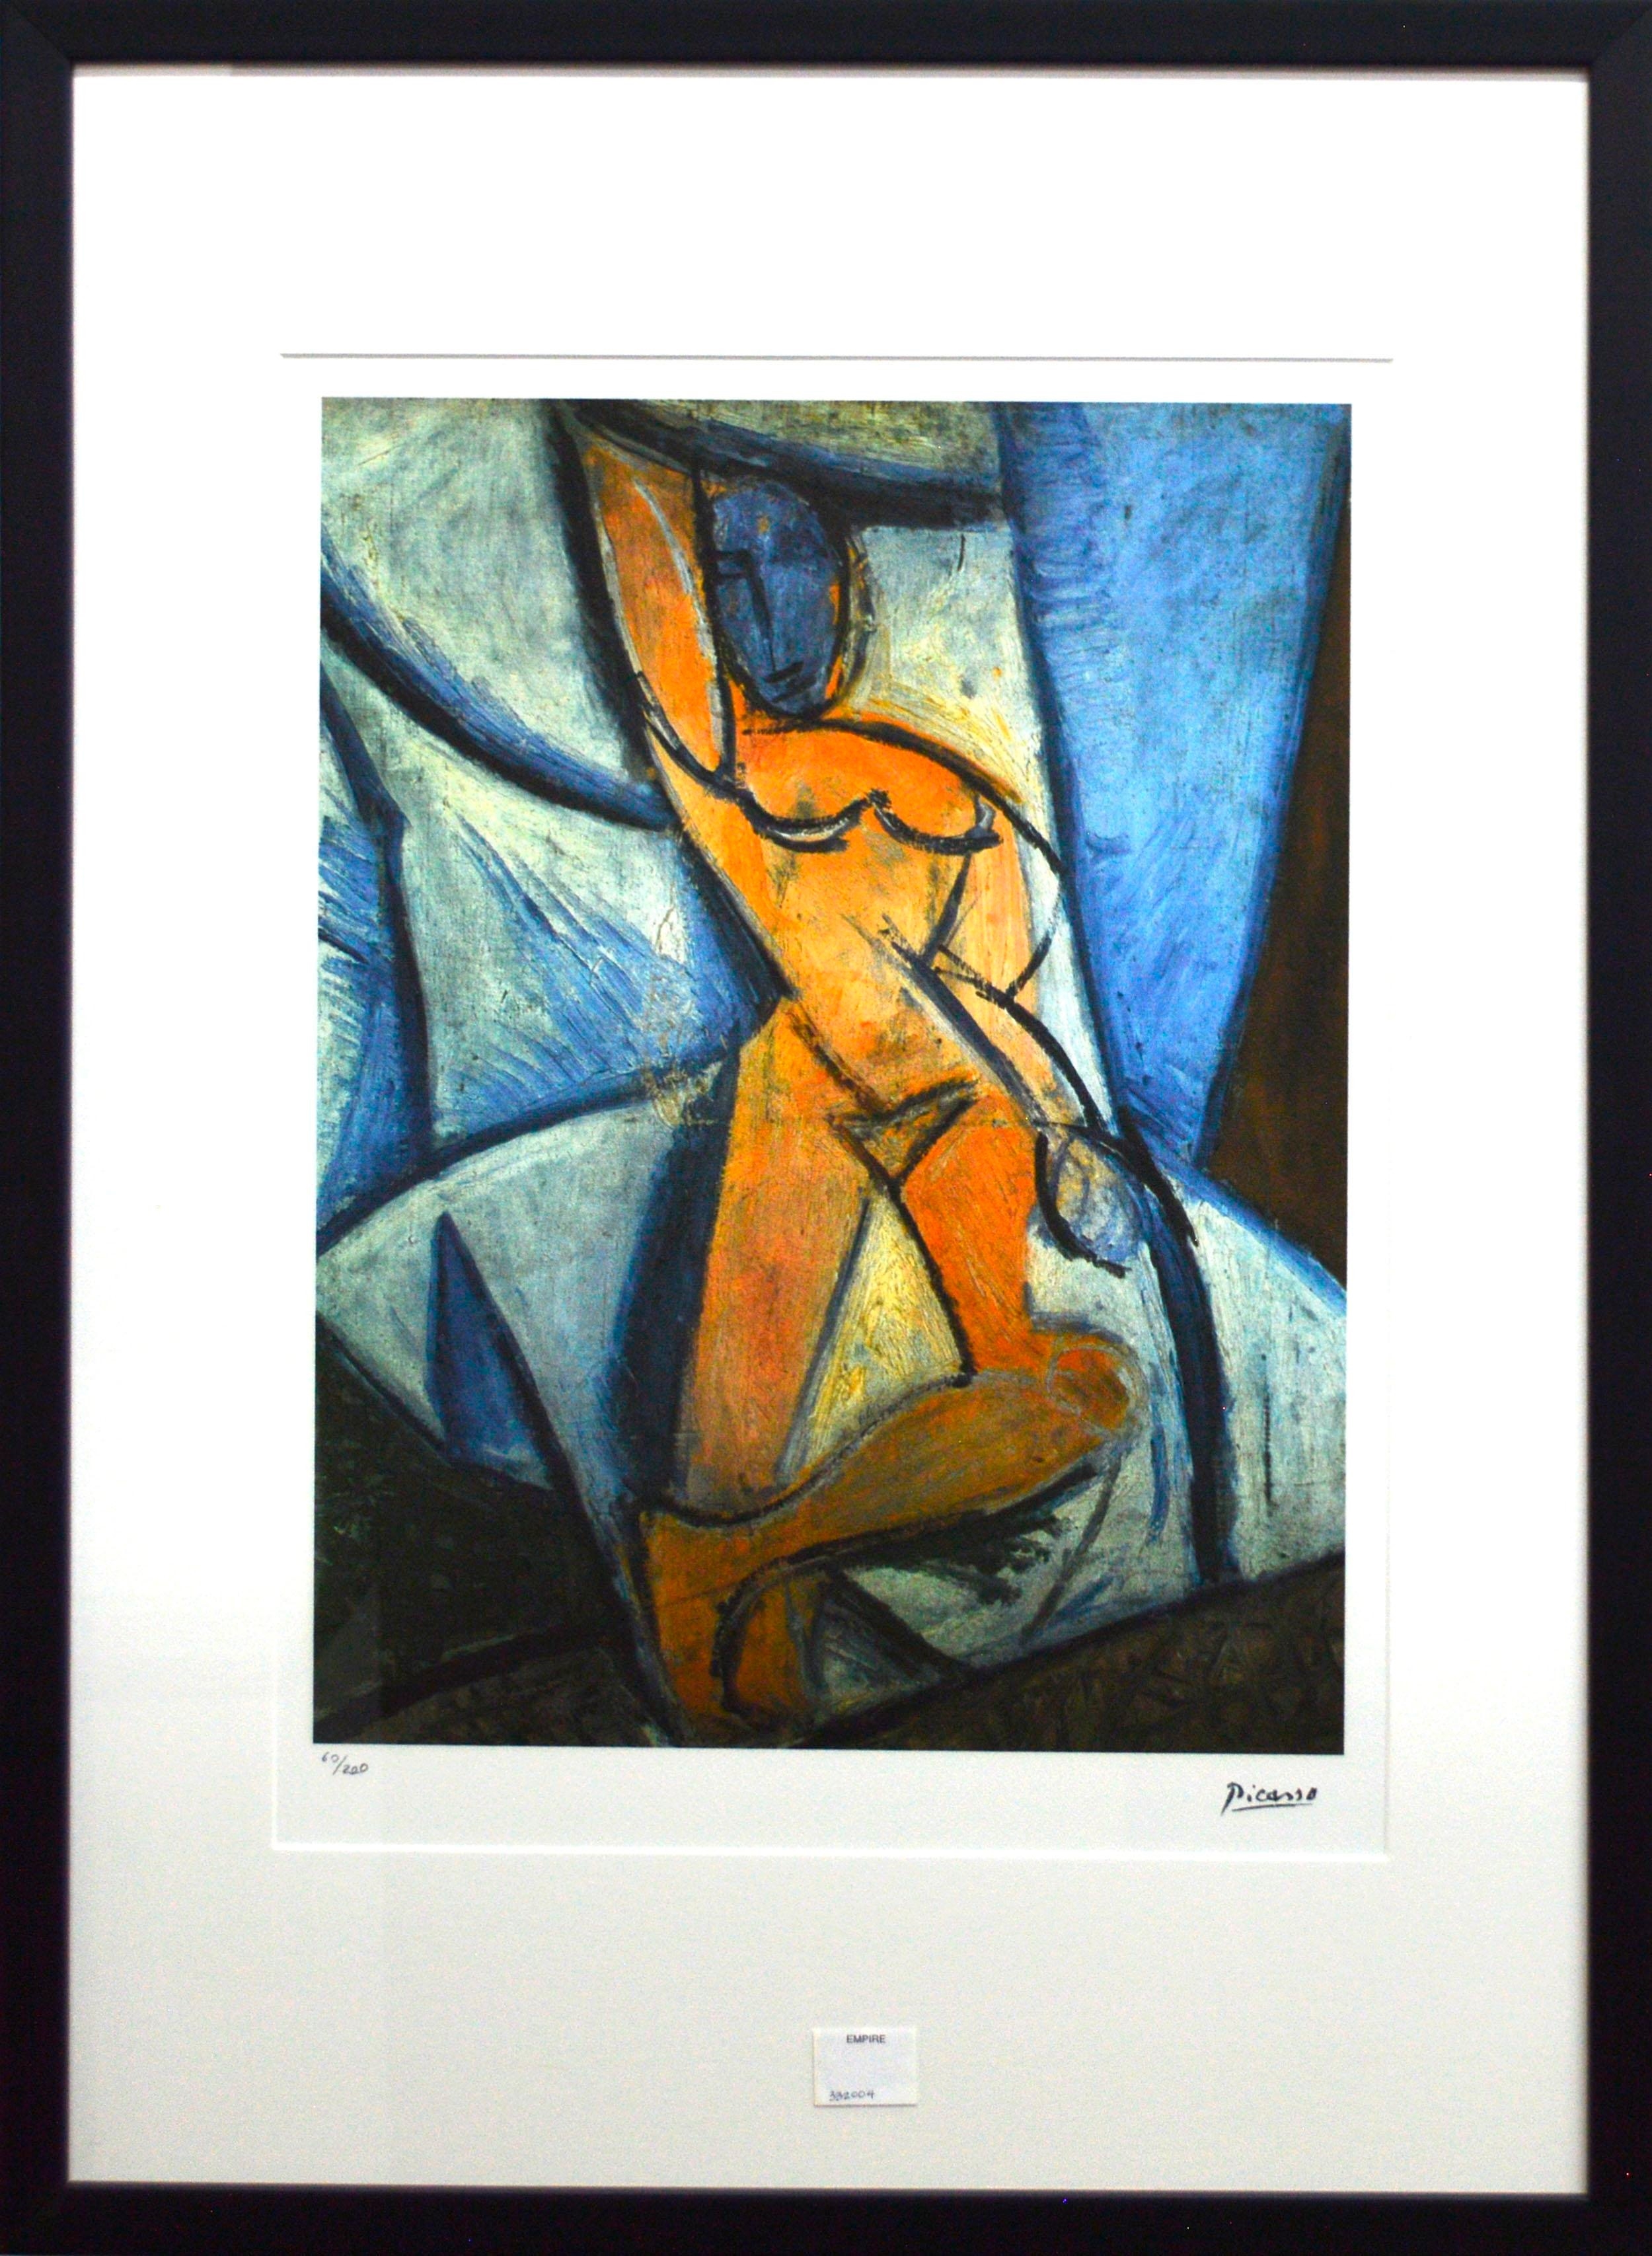 "Femme nue" by Pablo Picasso